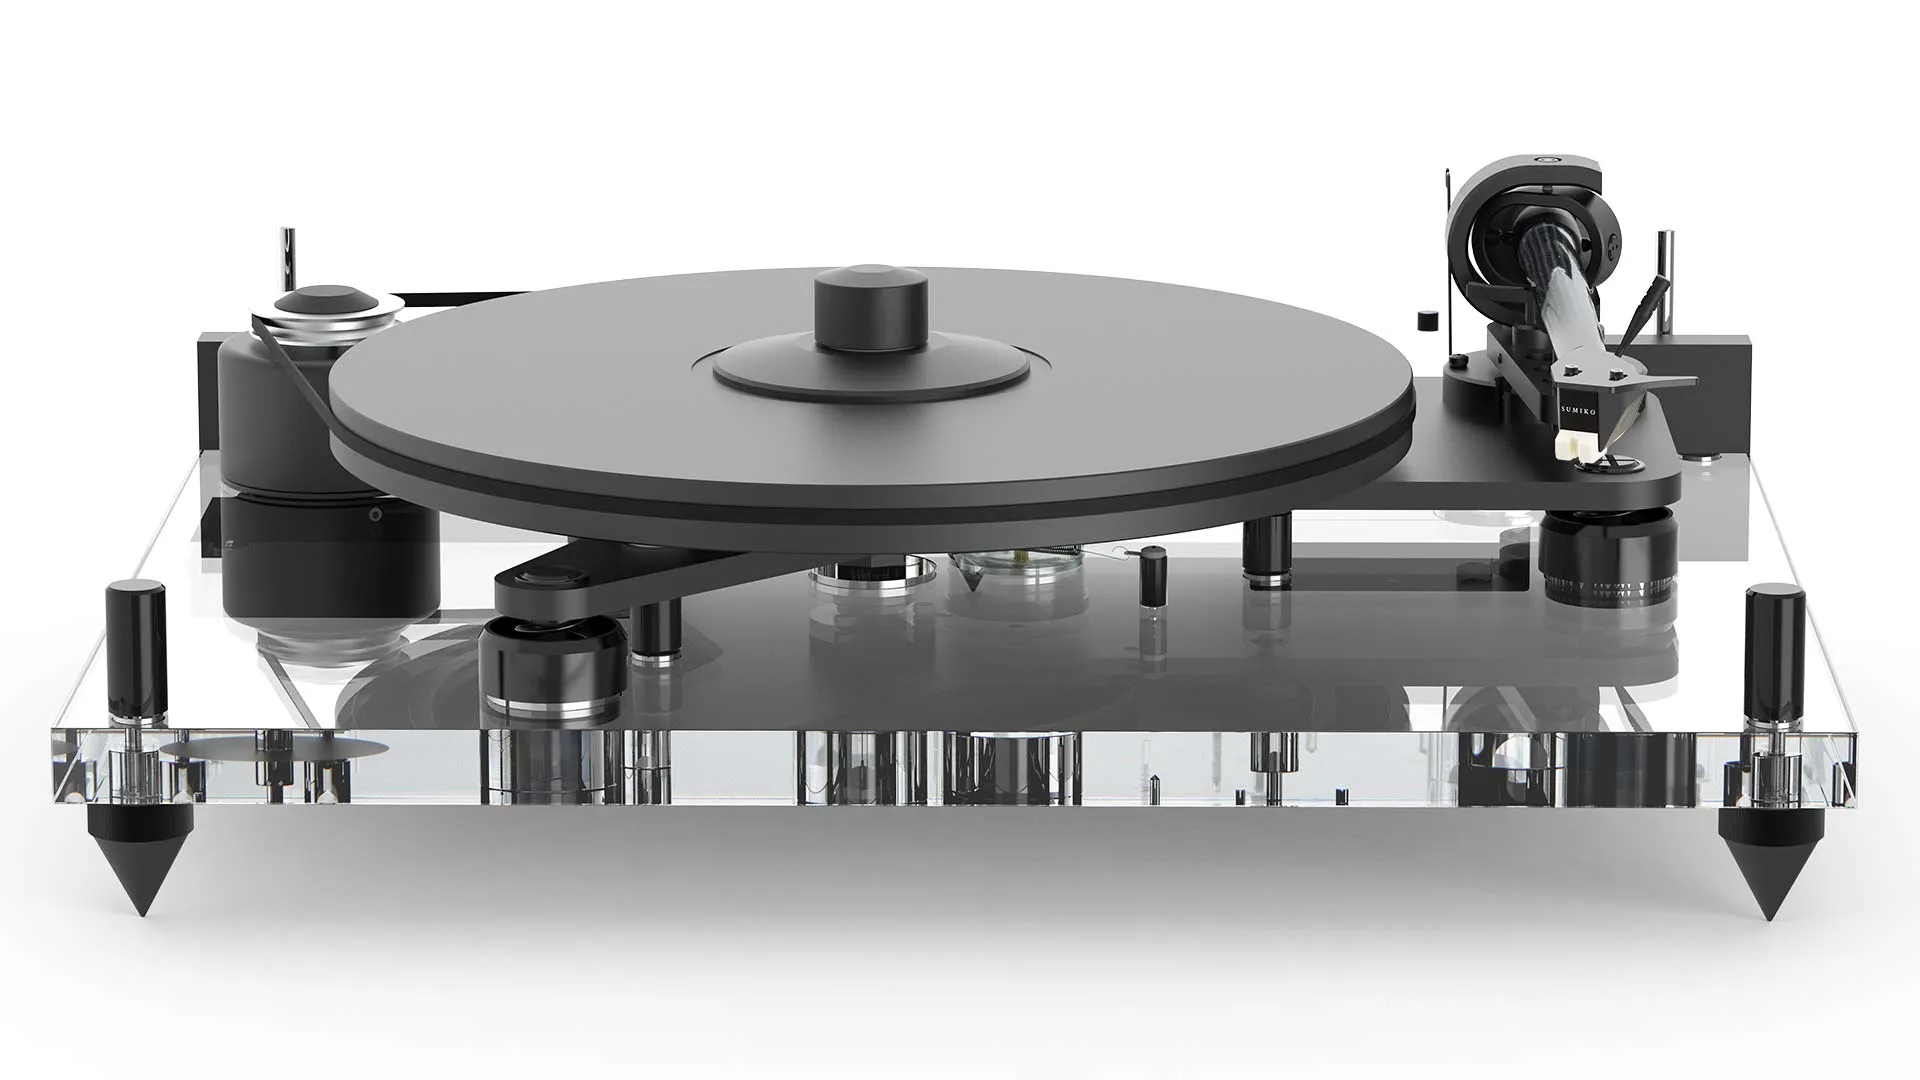 Pro-Ject Audio Systems Perspective Limited Final Edition Suspended Turntable with Sumiko Rainier MM Phono Cartridge